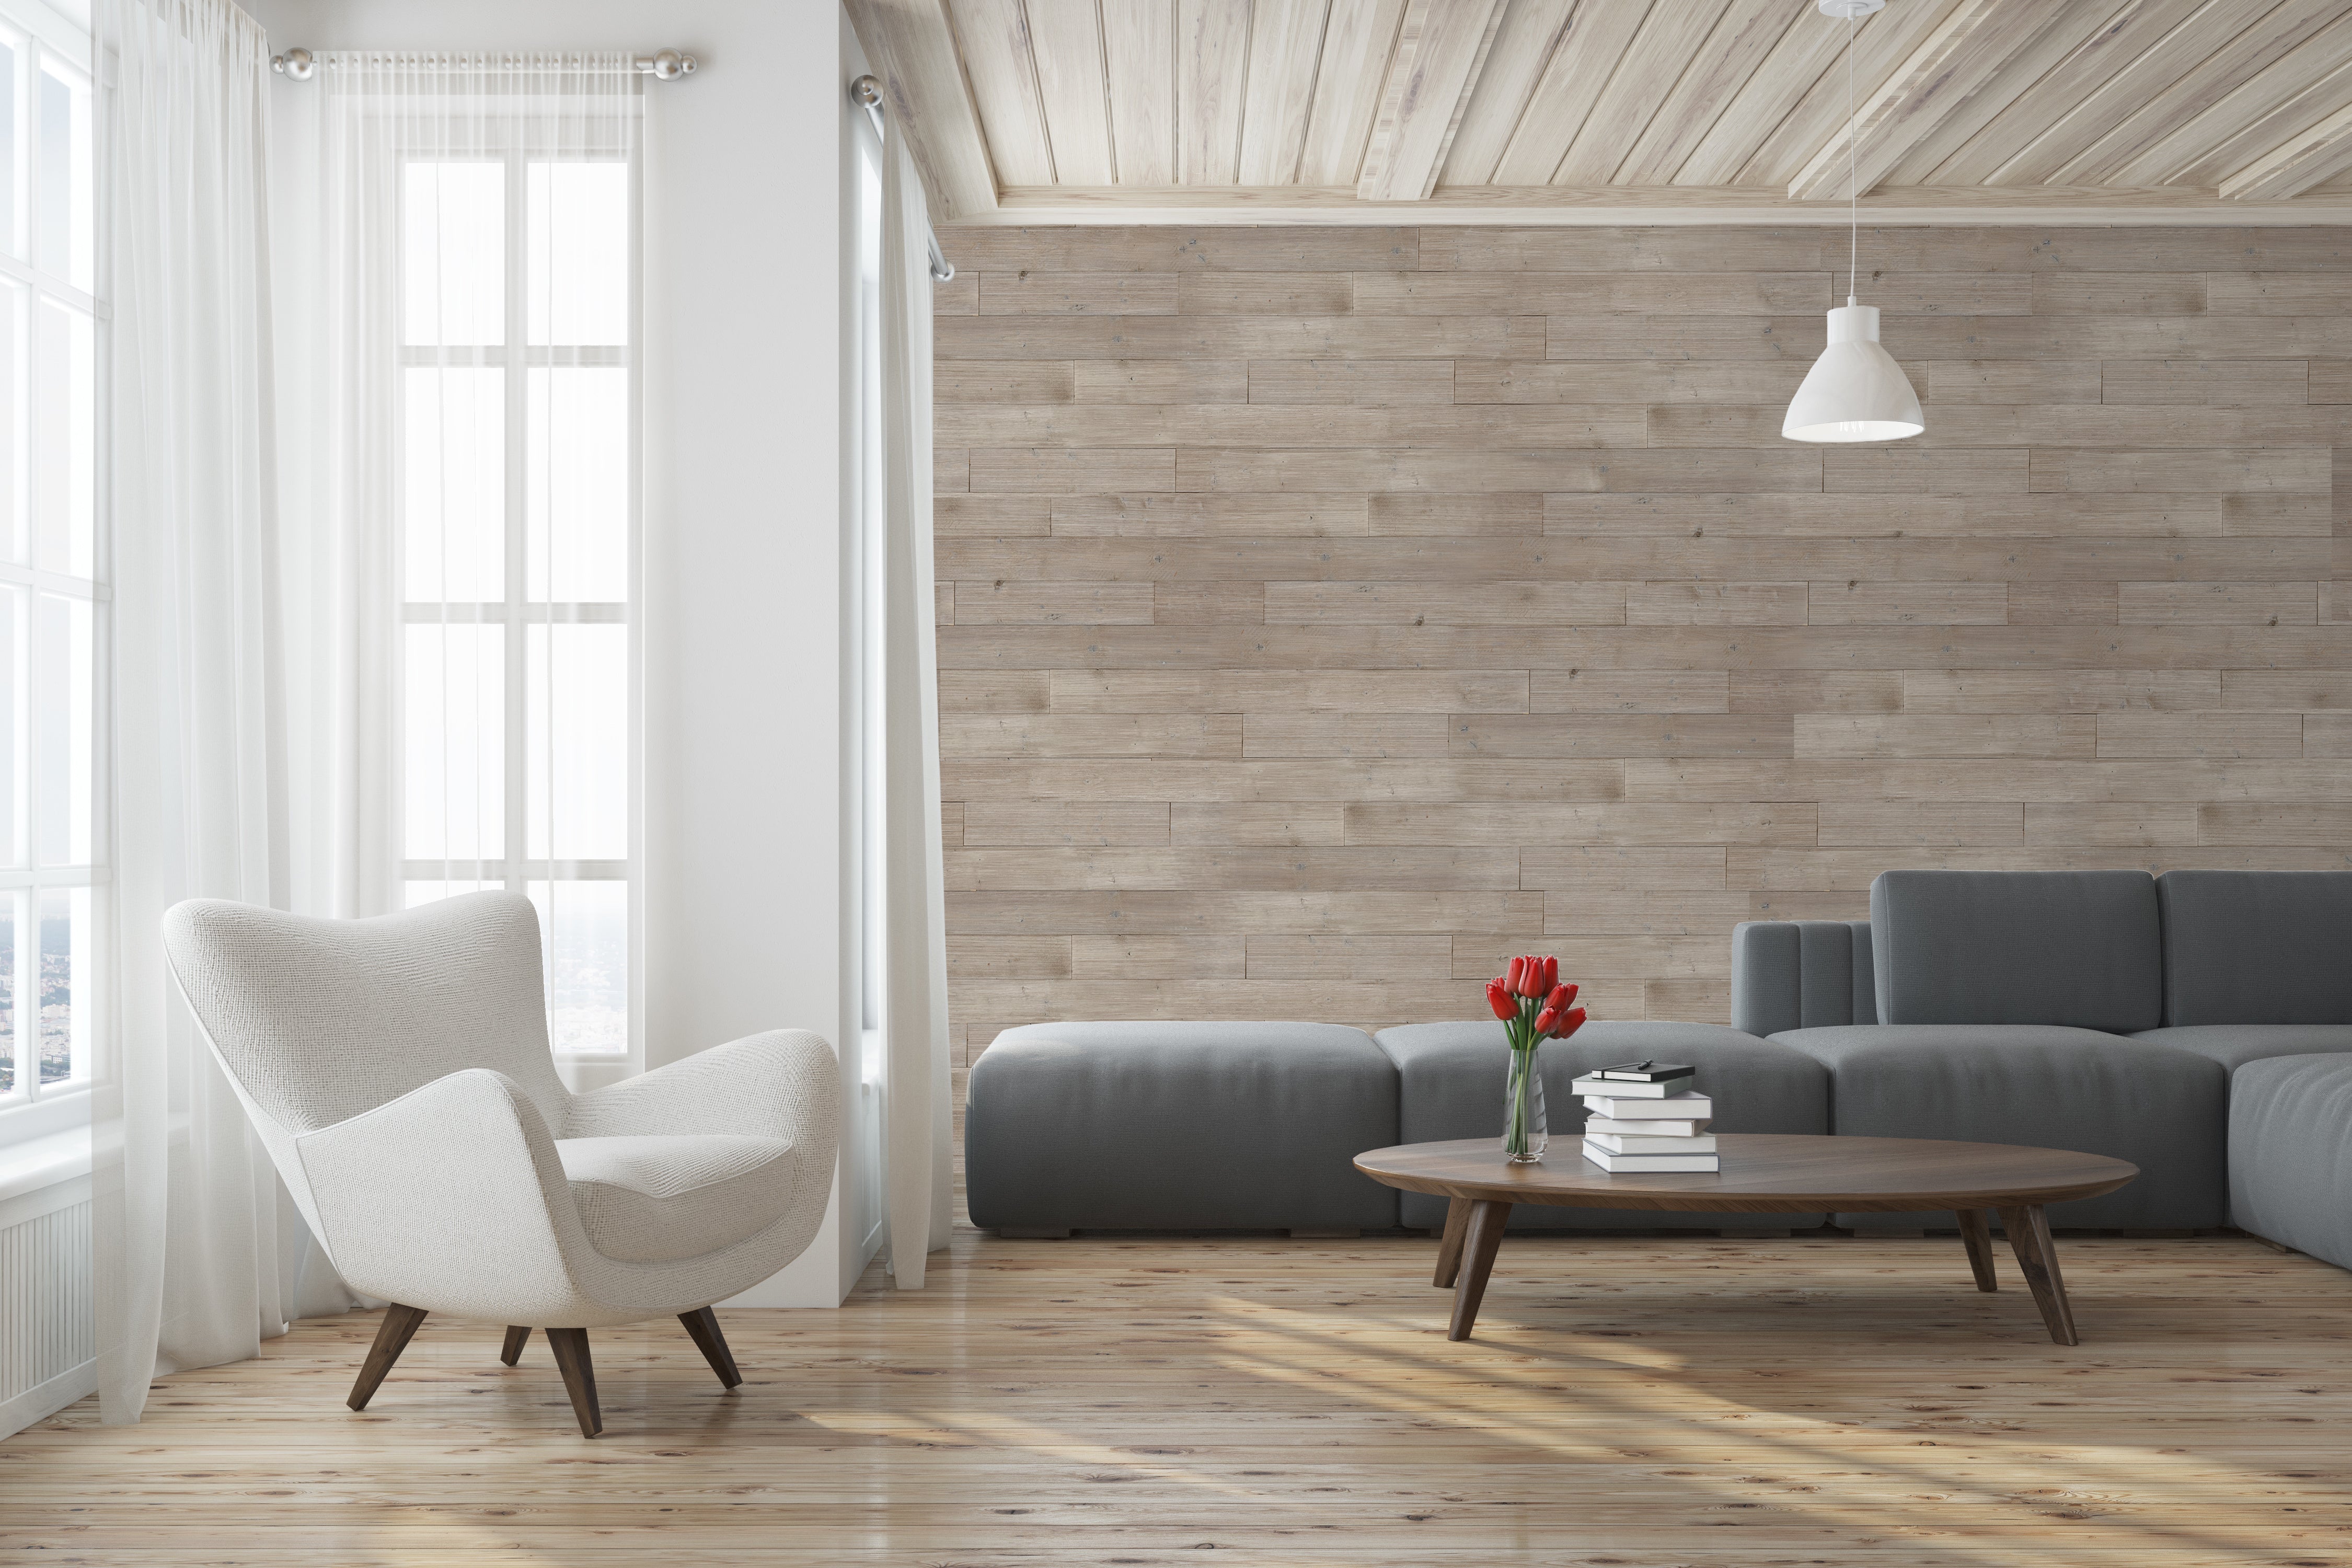 Dove Grey Peel and Stick Wood Wall Panels